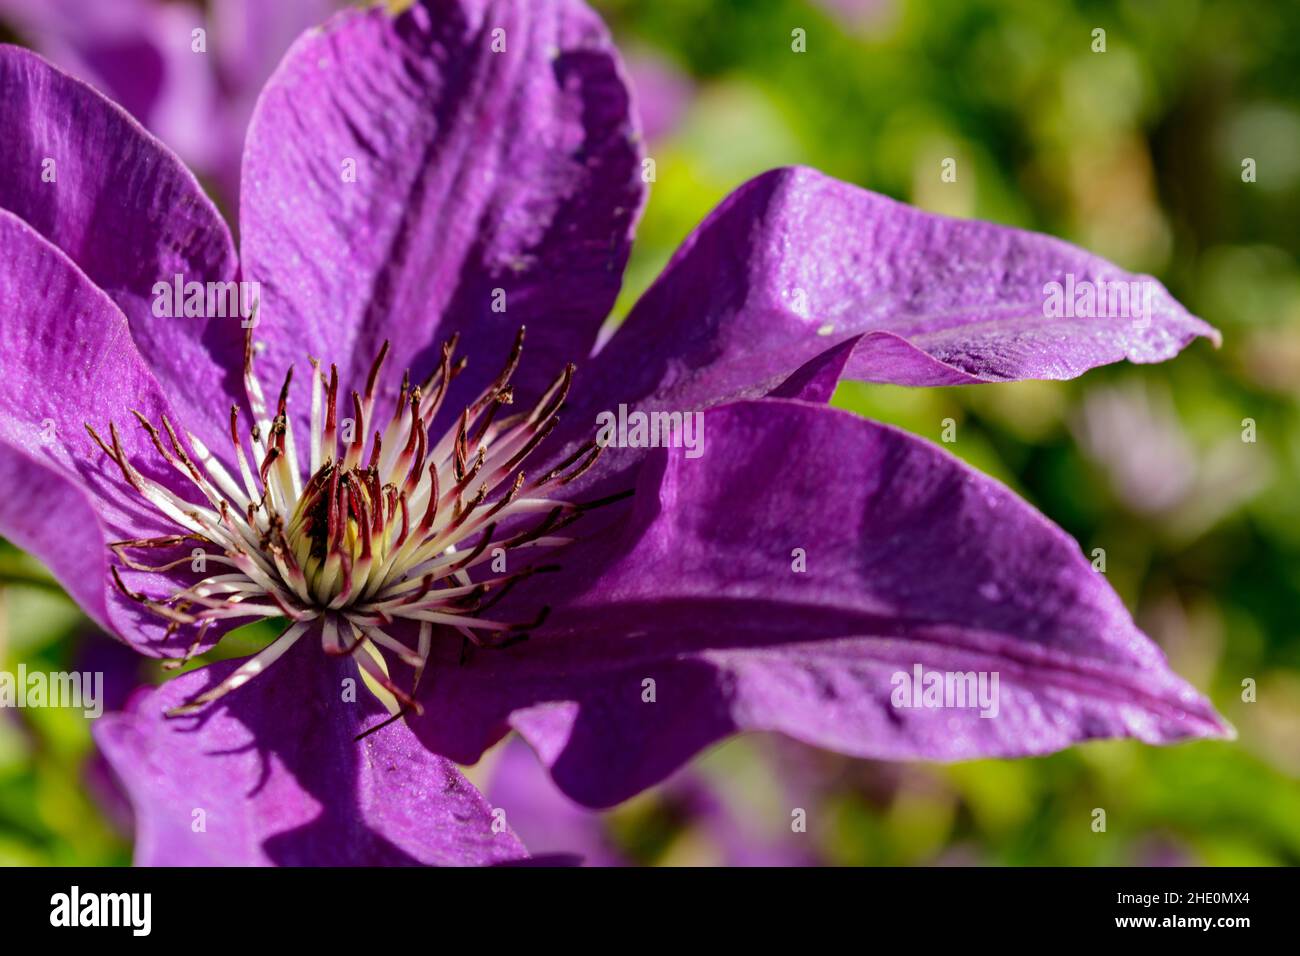 Close up of purple clematis flower (Clematis viticella) also known as Italian leather flower. Macro shot of single purple blossom. Stock Photo